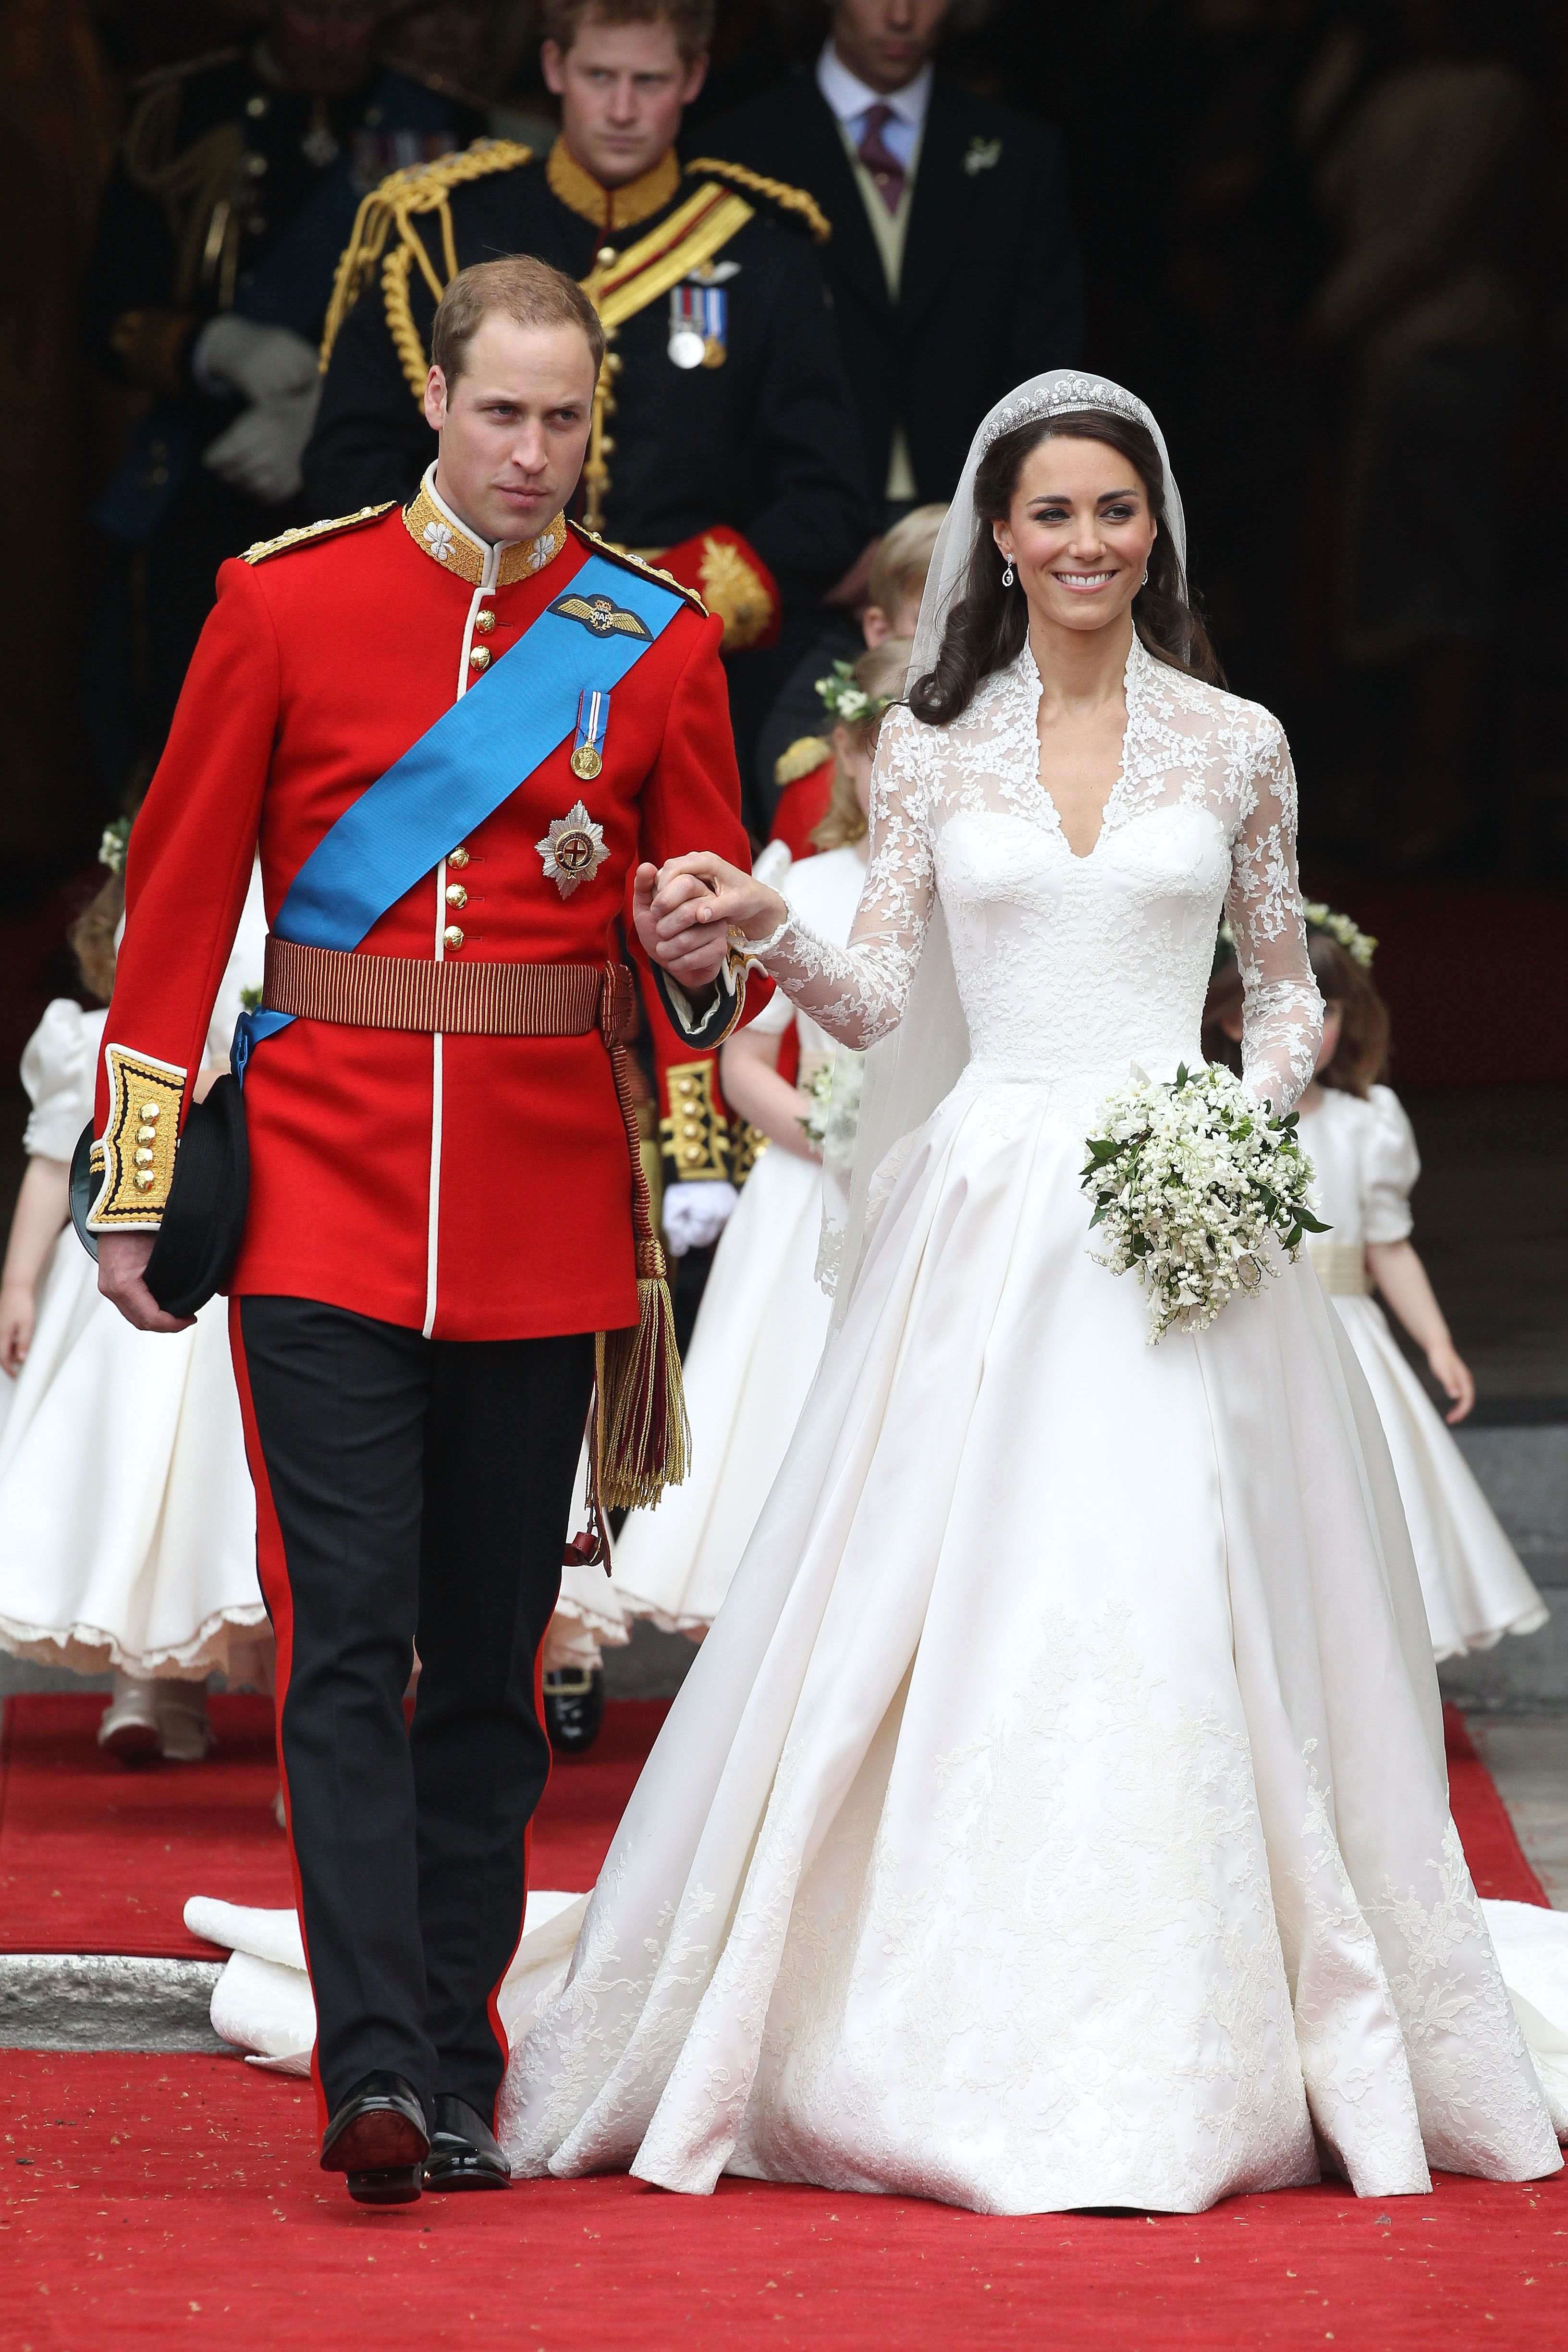 9 Of The Most Expensive Celebrity Wedding Dresses Ever Priciest Bridal Gowns Of All Time